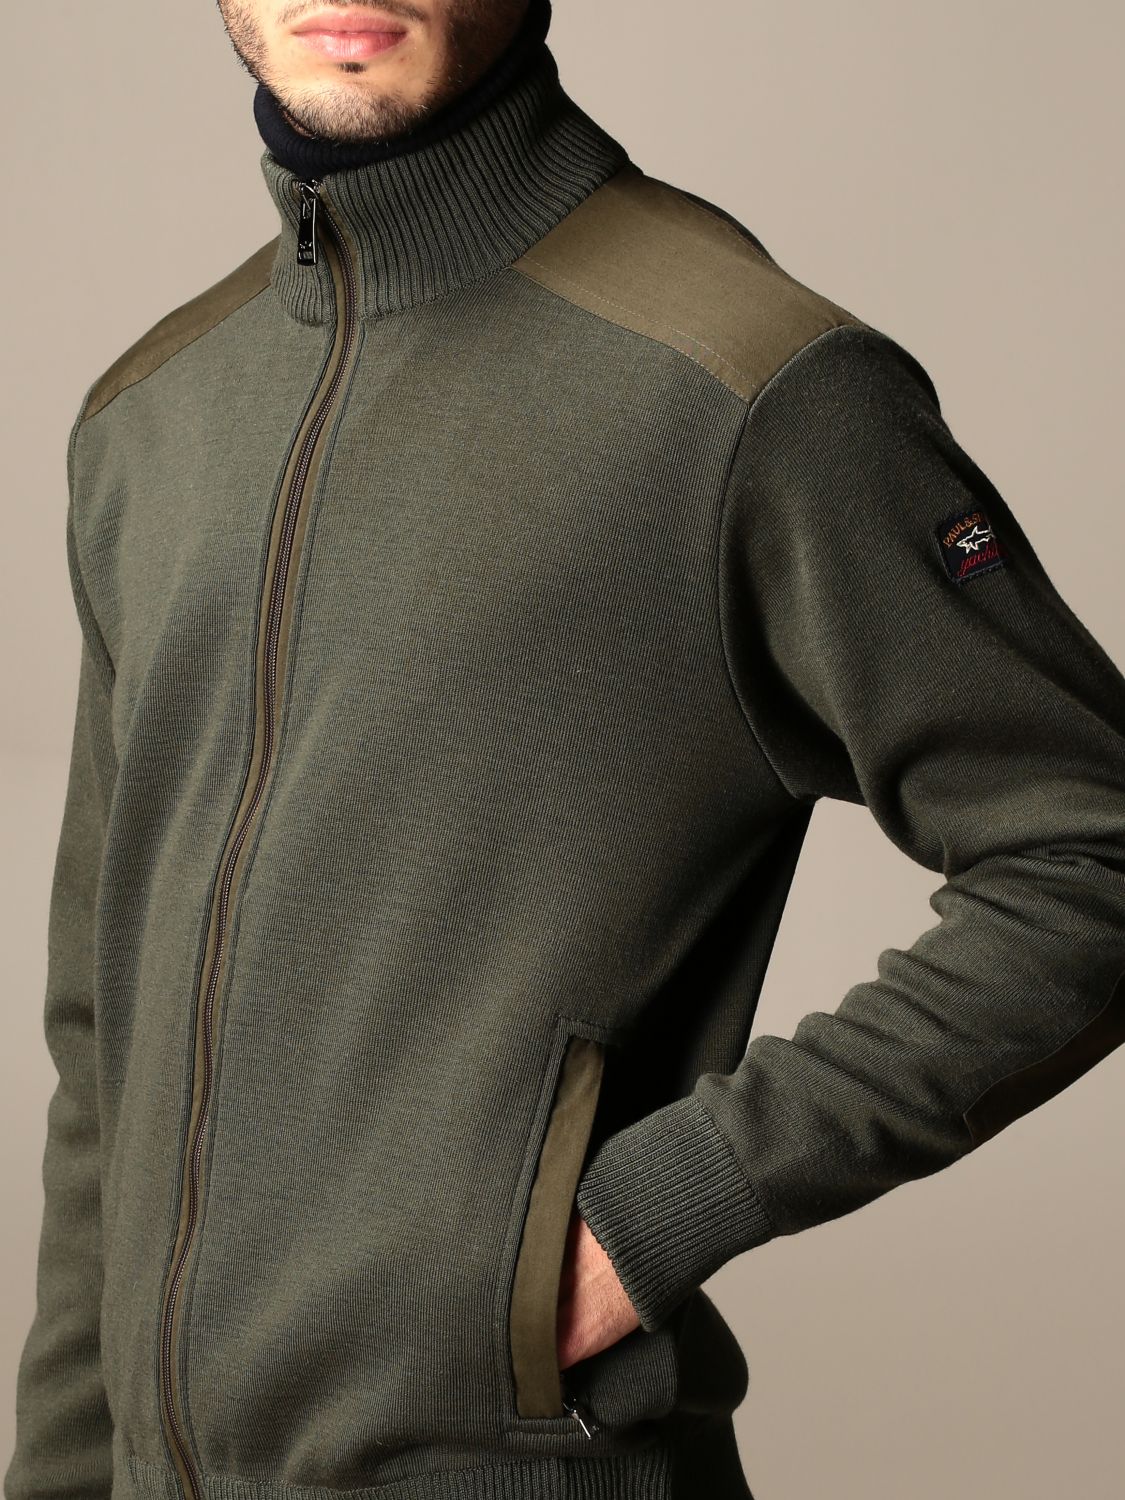 Paul & Shark Outlet: with zip and contrasting details | Sweater Paul & Shark Men Green | Paul & Shark C0P1029 GIGLIO.COM